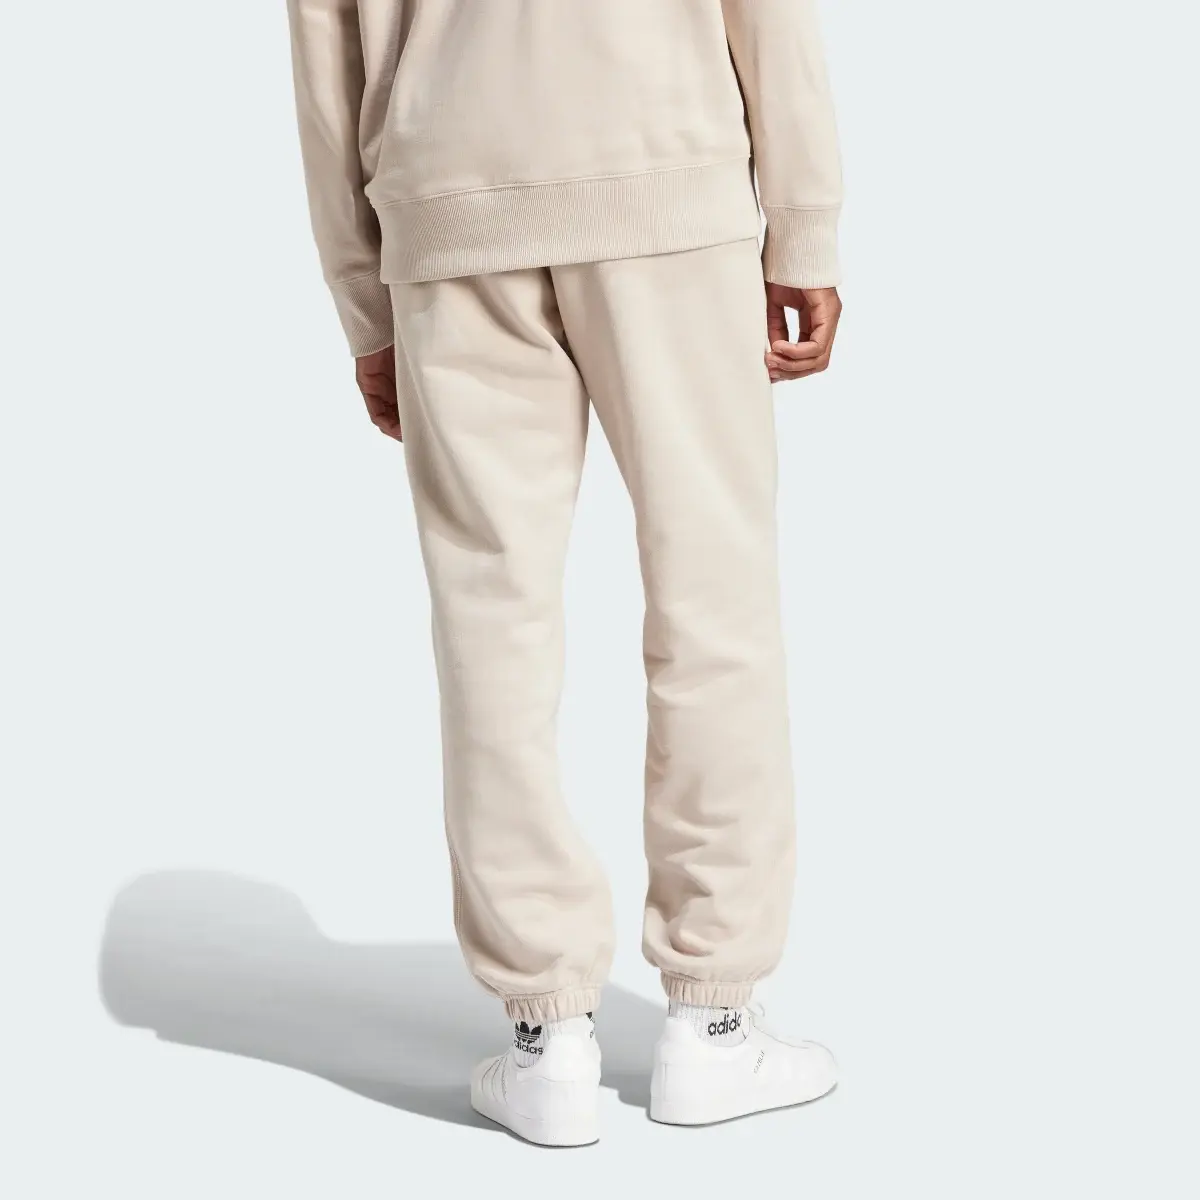 Adidas Adicolor Contempo French Terry Sweat Pants. 2